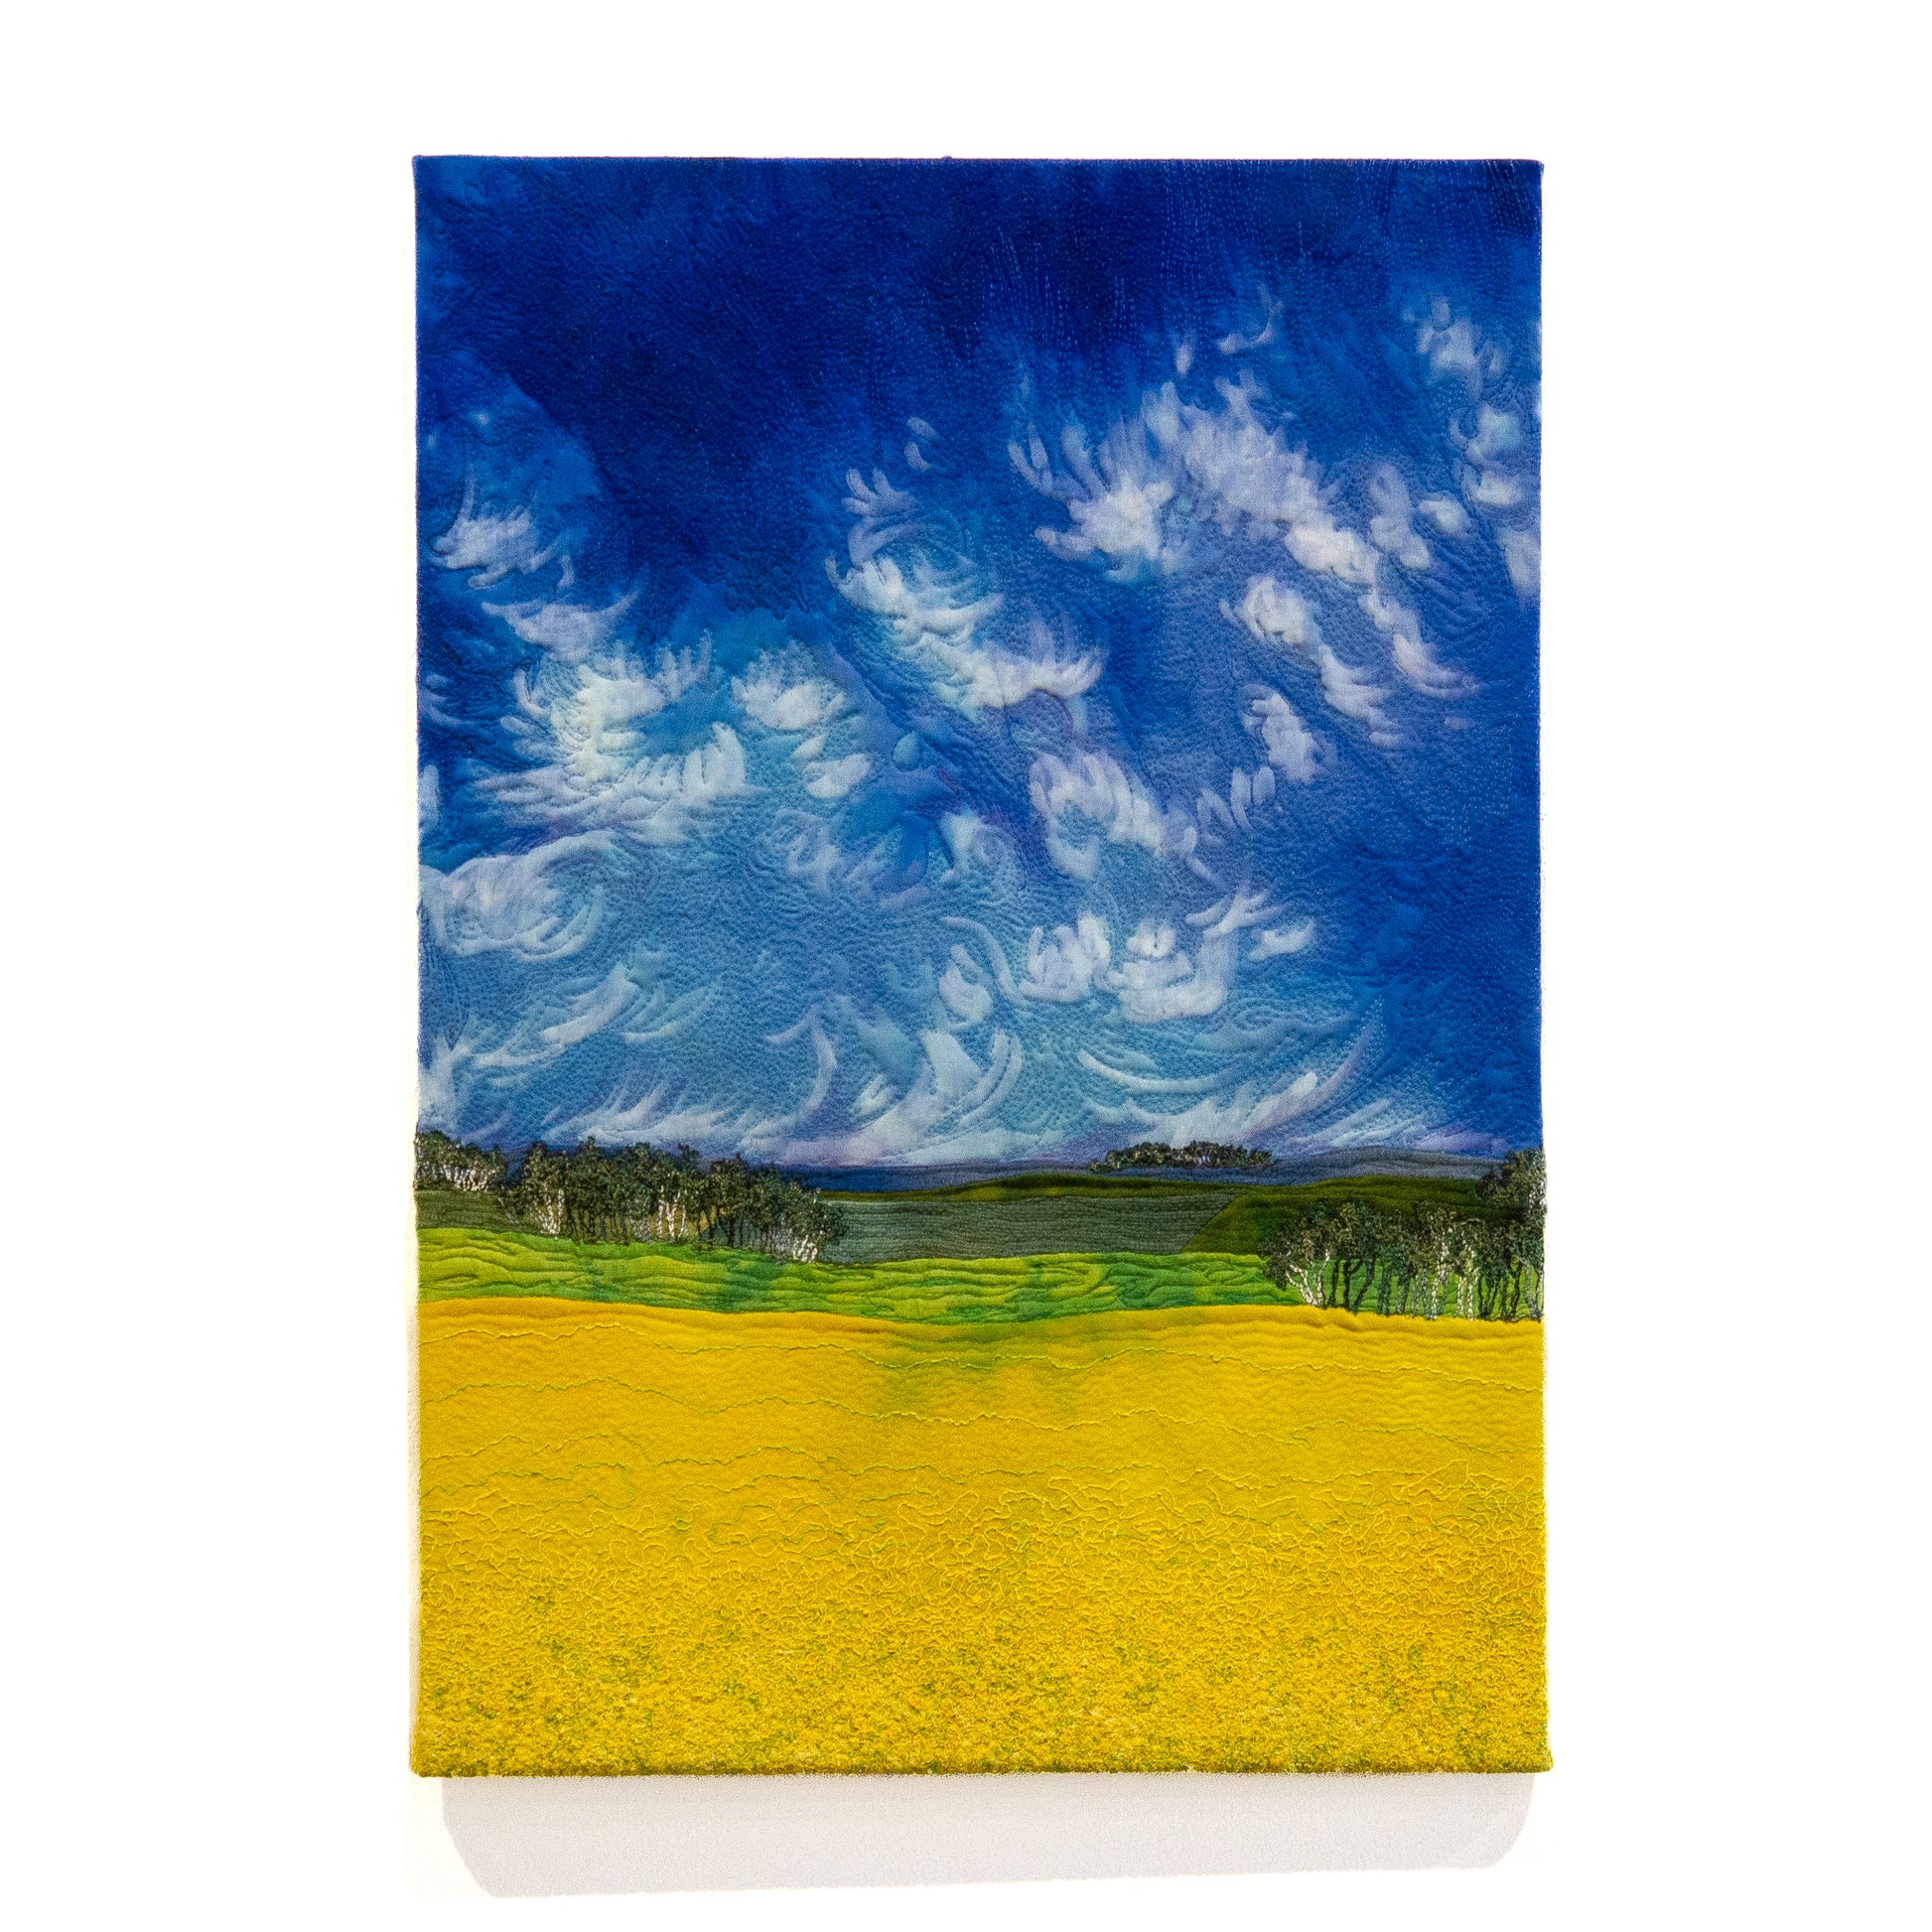 Embroidered painting of a storm sky and canola fields